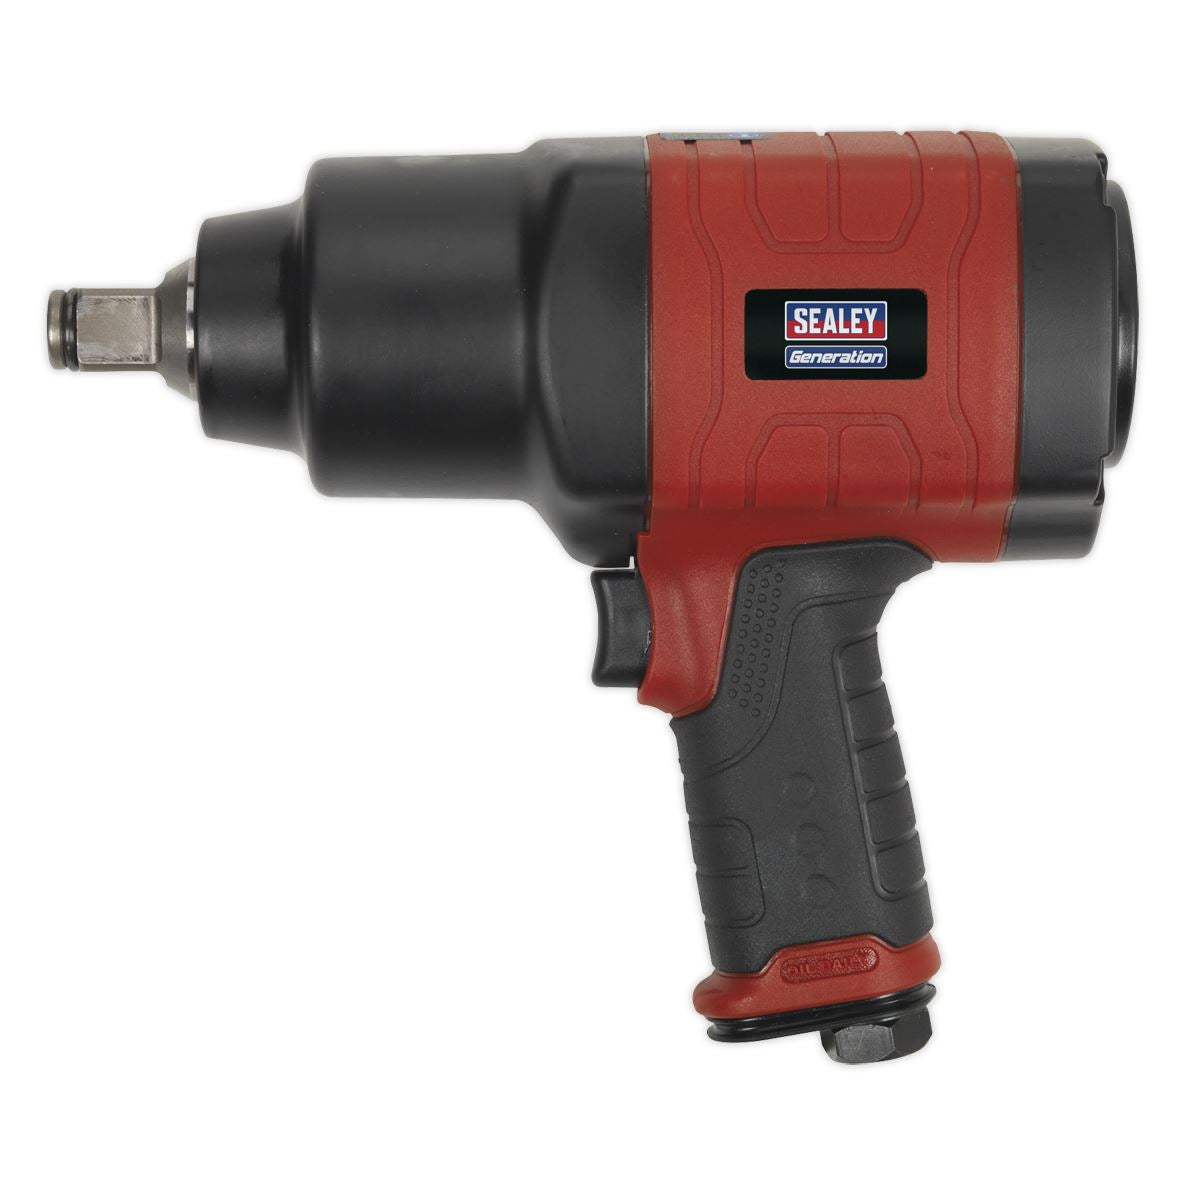 Generation Composite Air Impact Wrench 3/4"Sq Drive - Twin Hammer